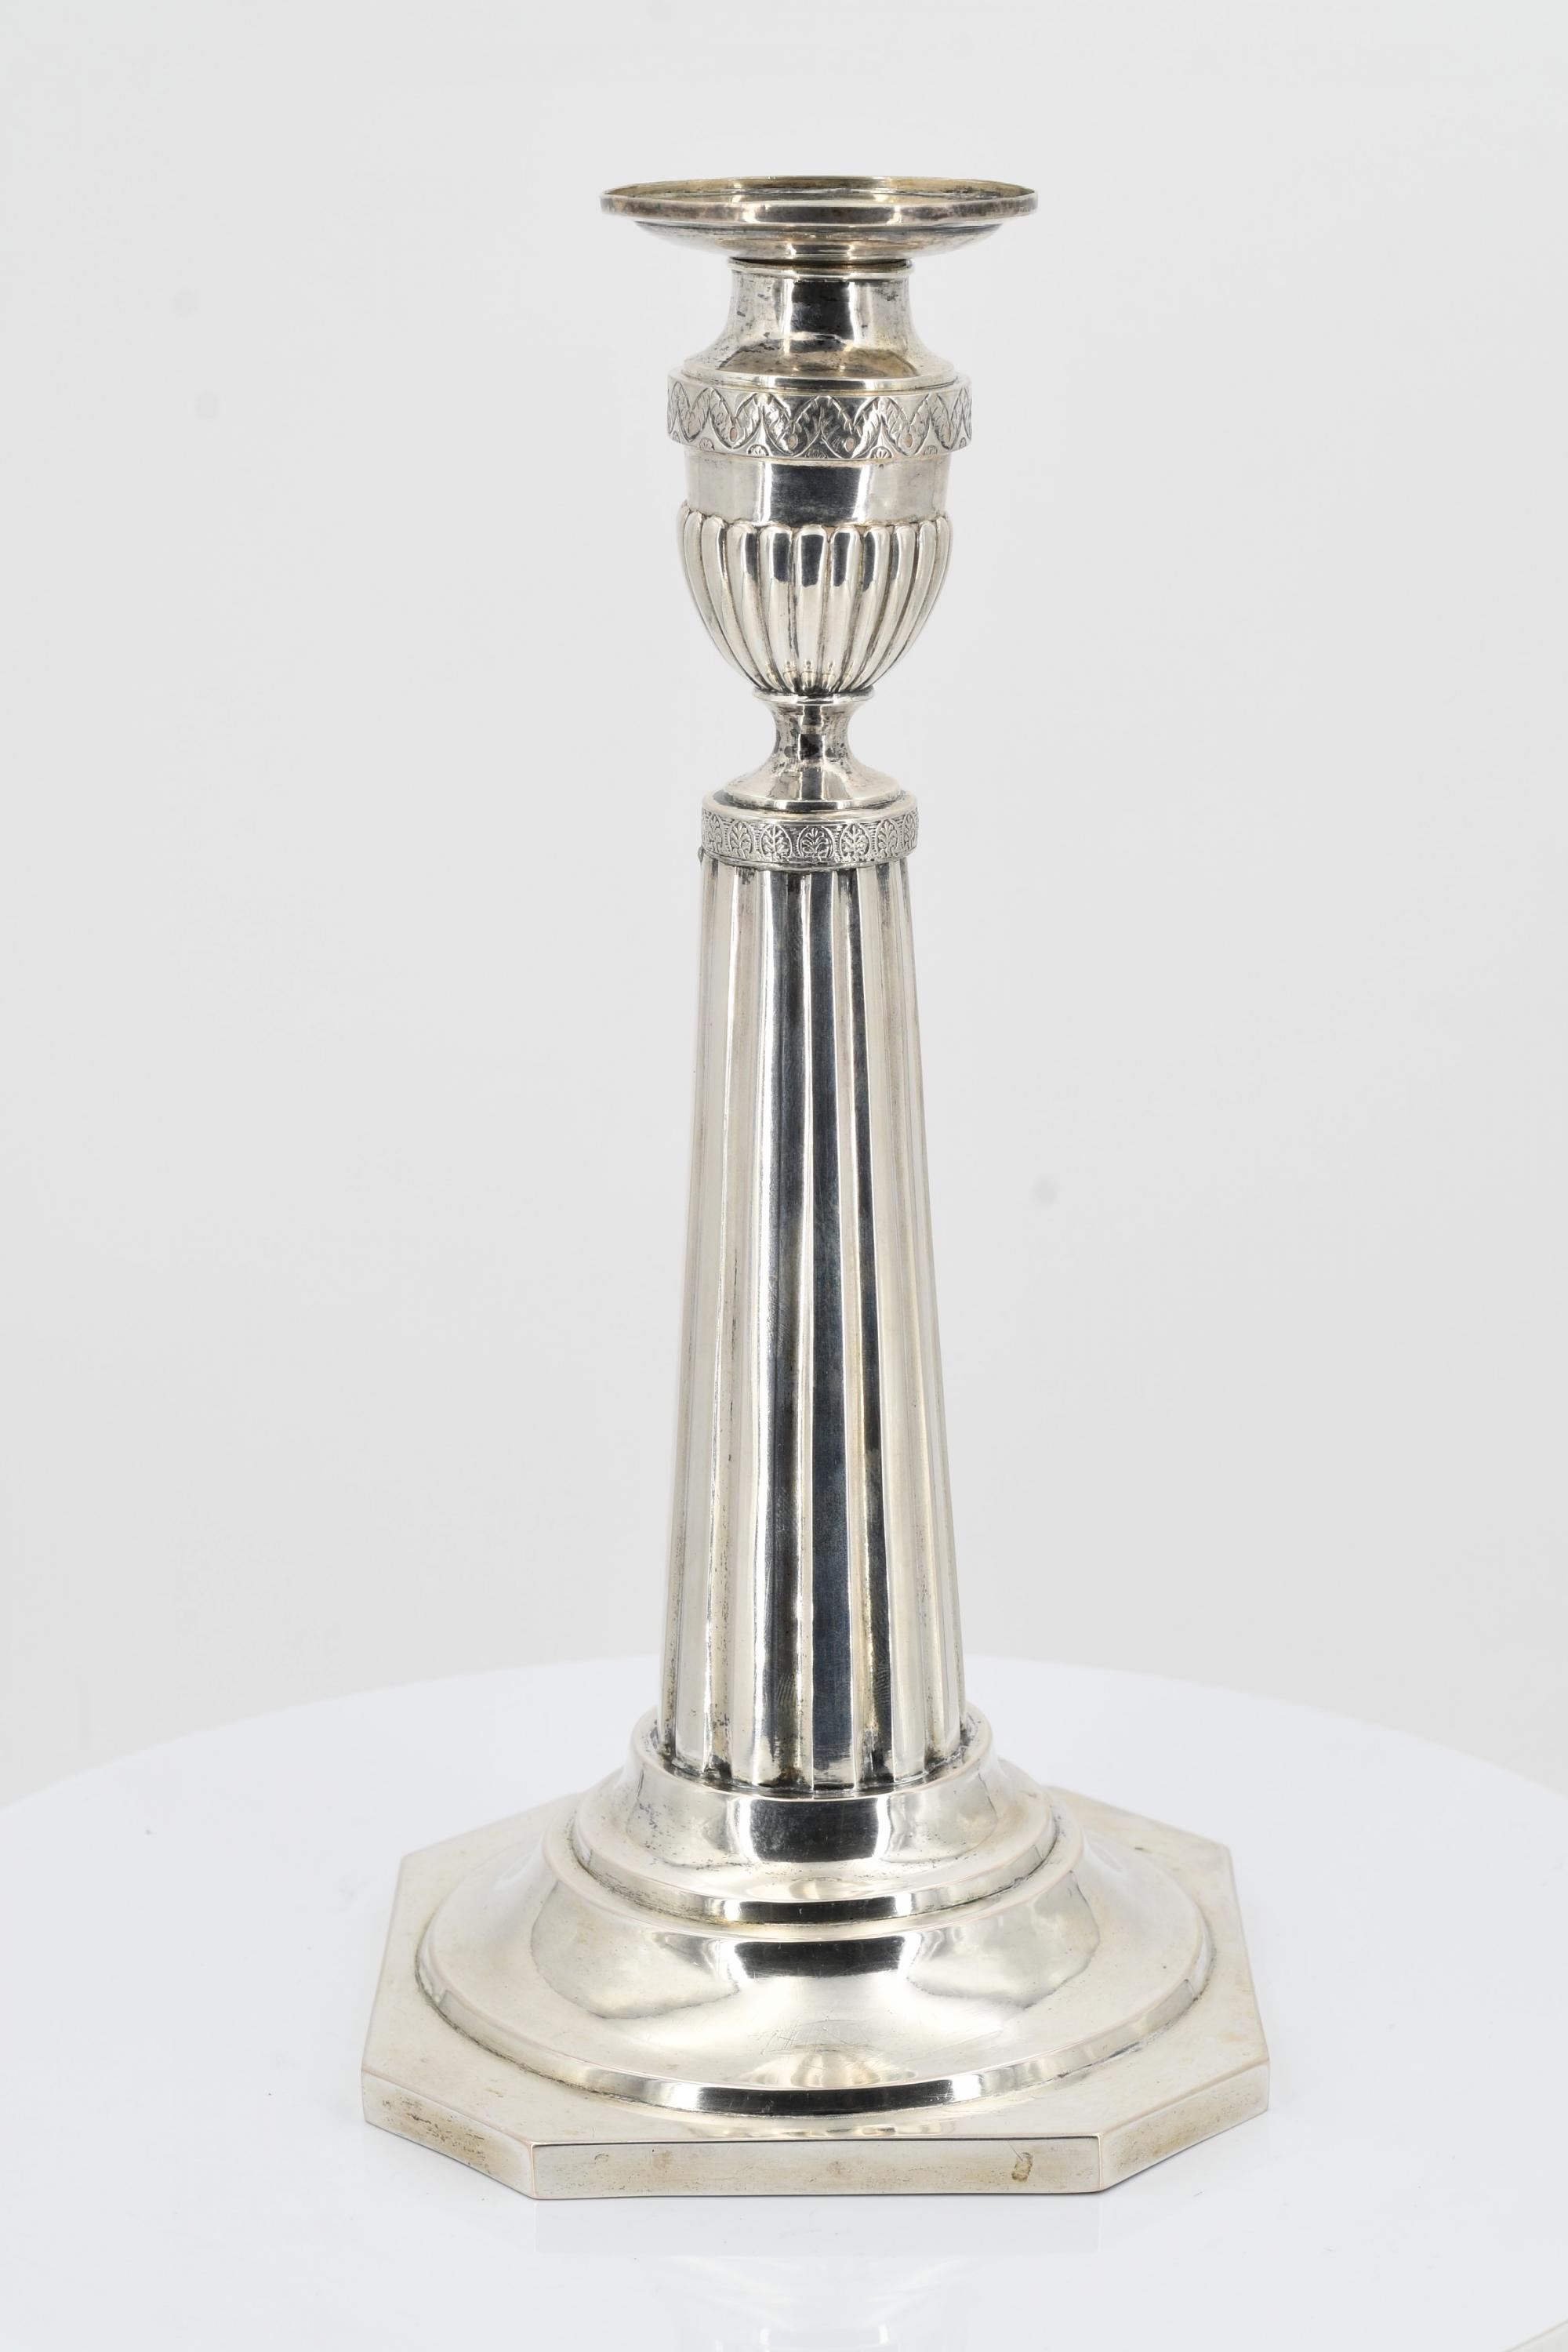 Pair of large candlesticks with fluted shafts - Image 9 of 12